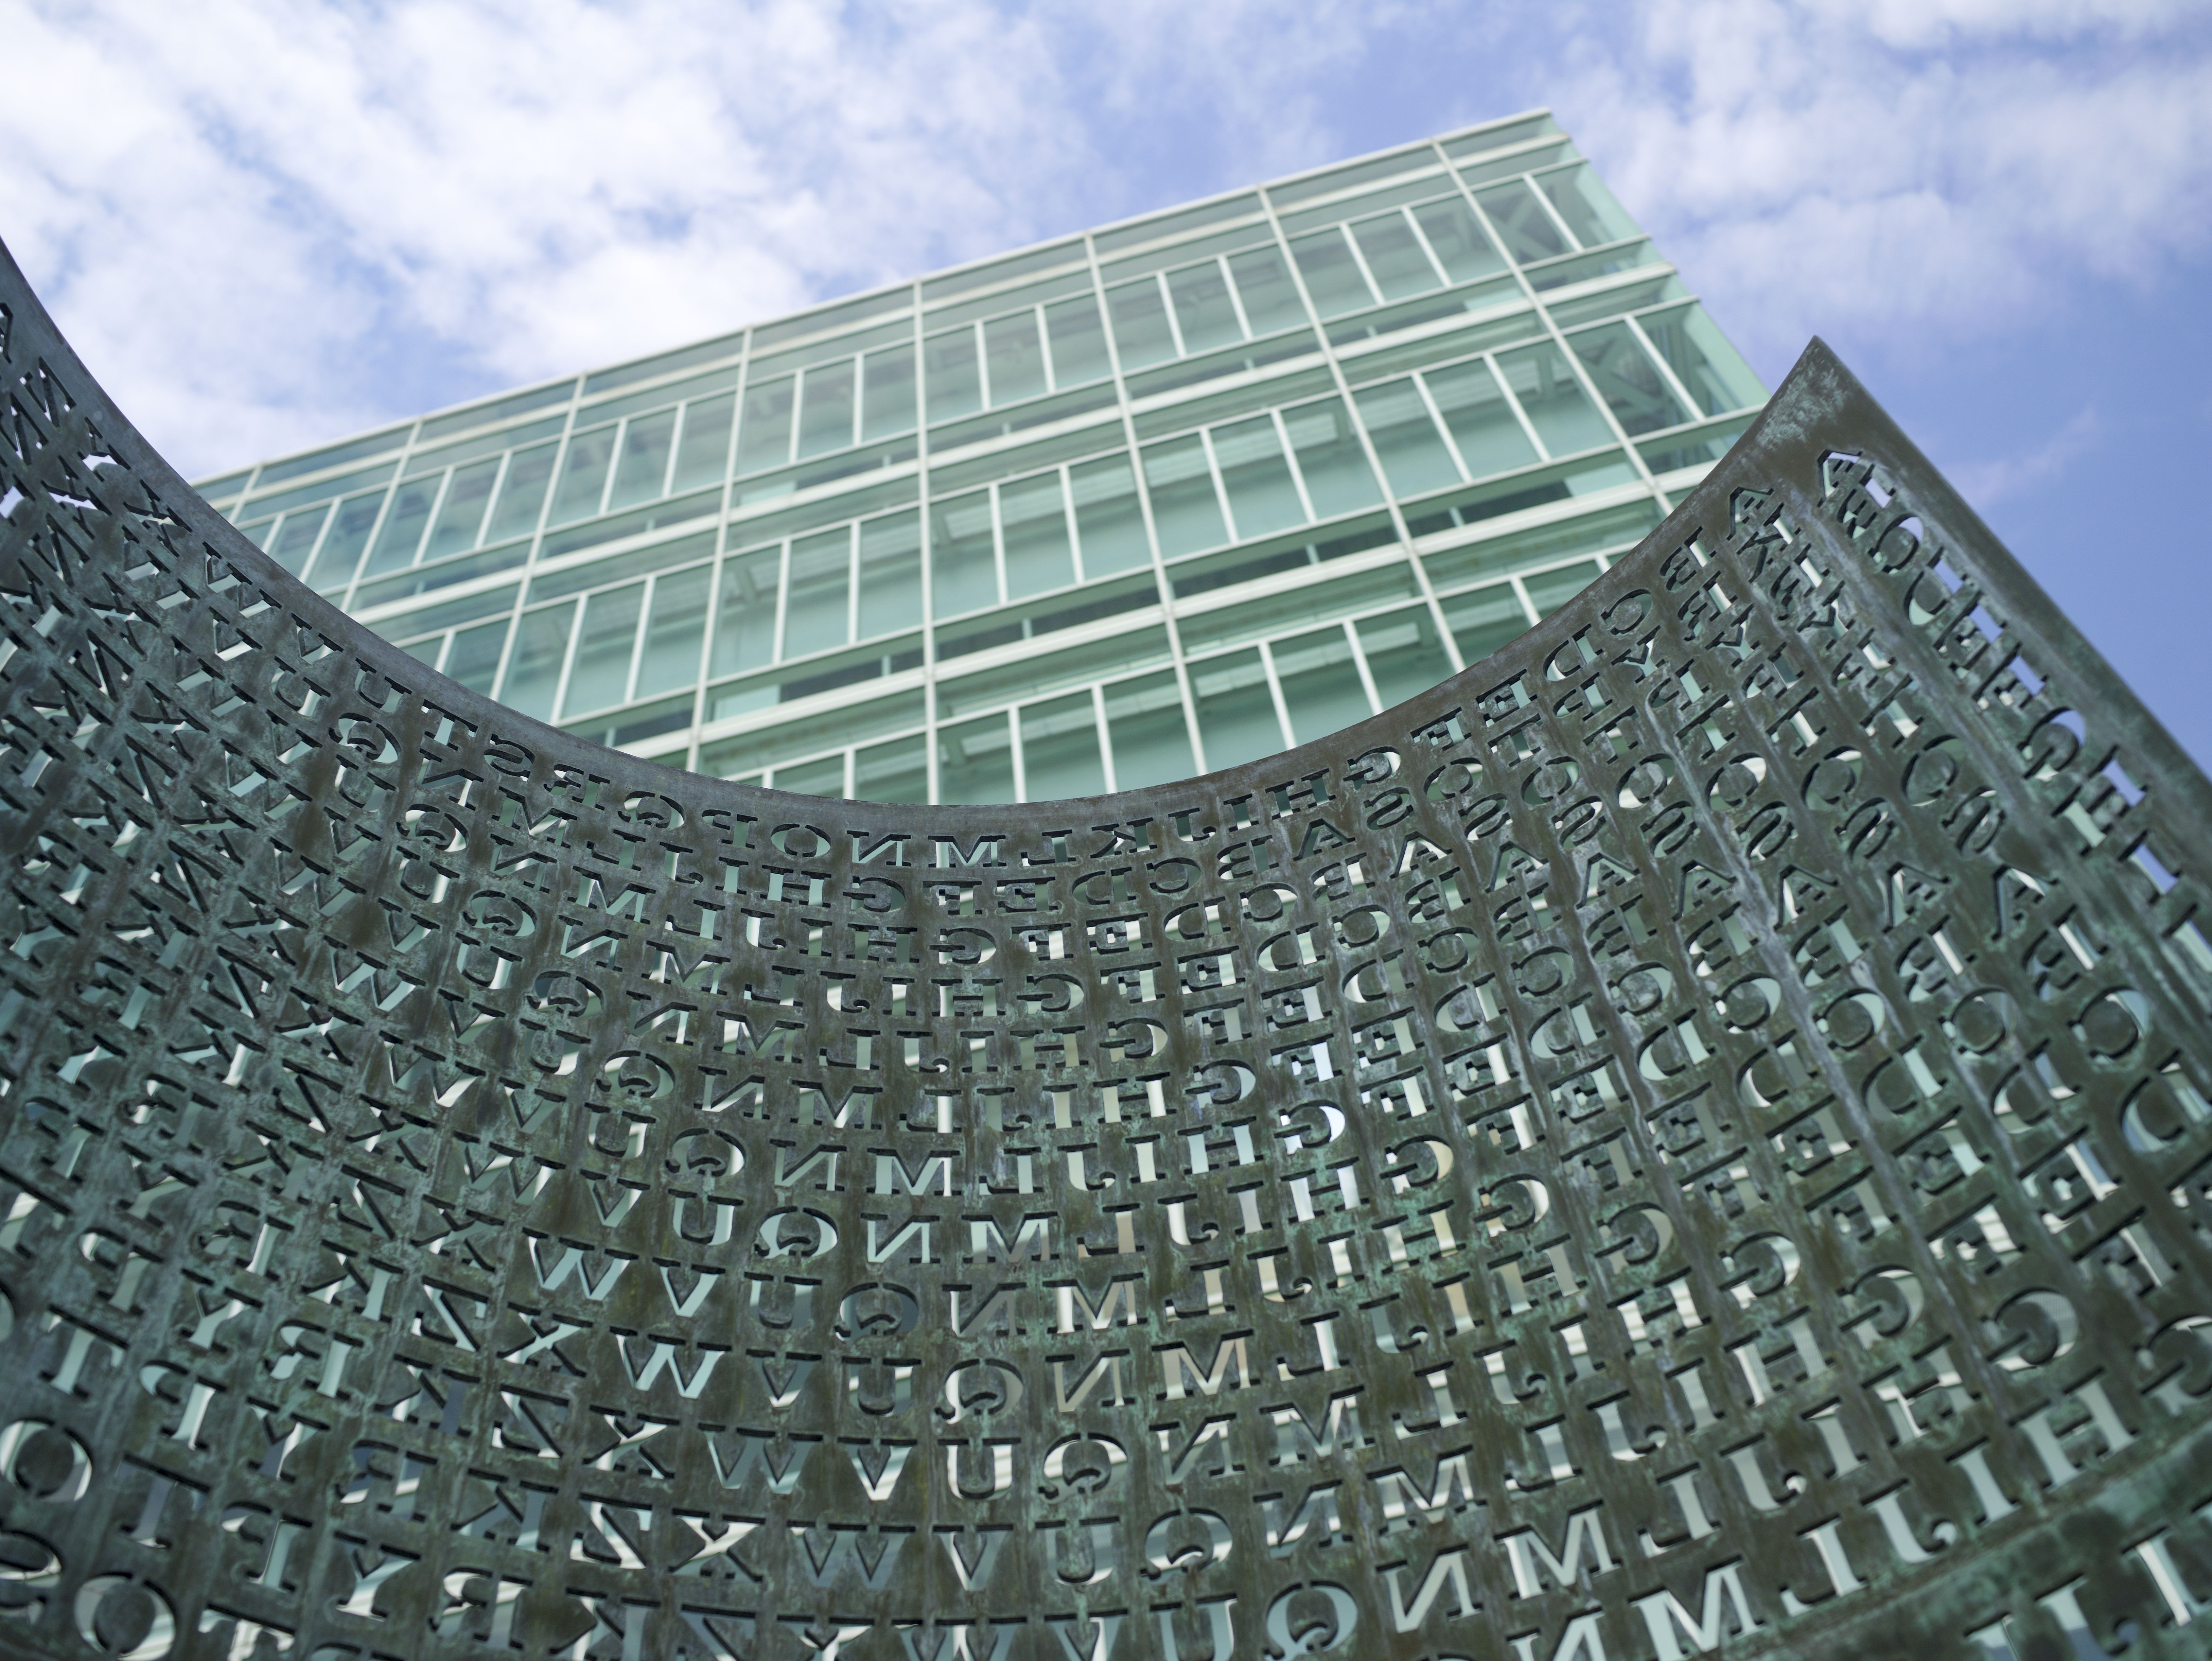 'Kryptos' is a sculpture by American artist Jim Sanborn located on the grounds of the CIA